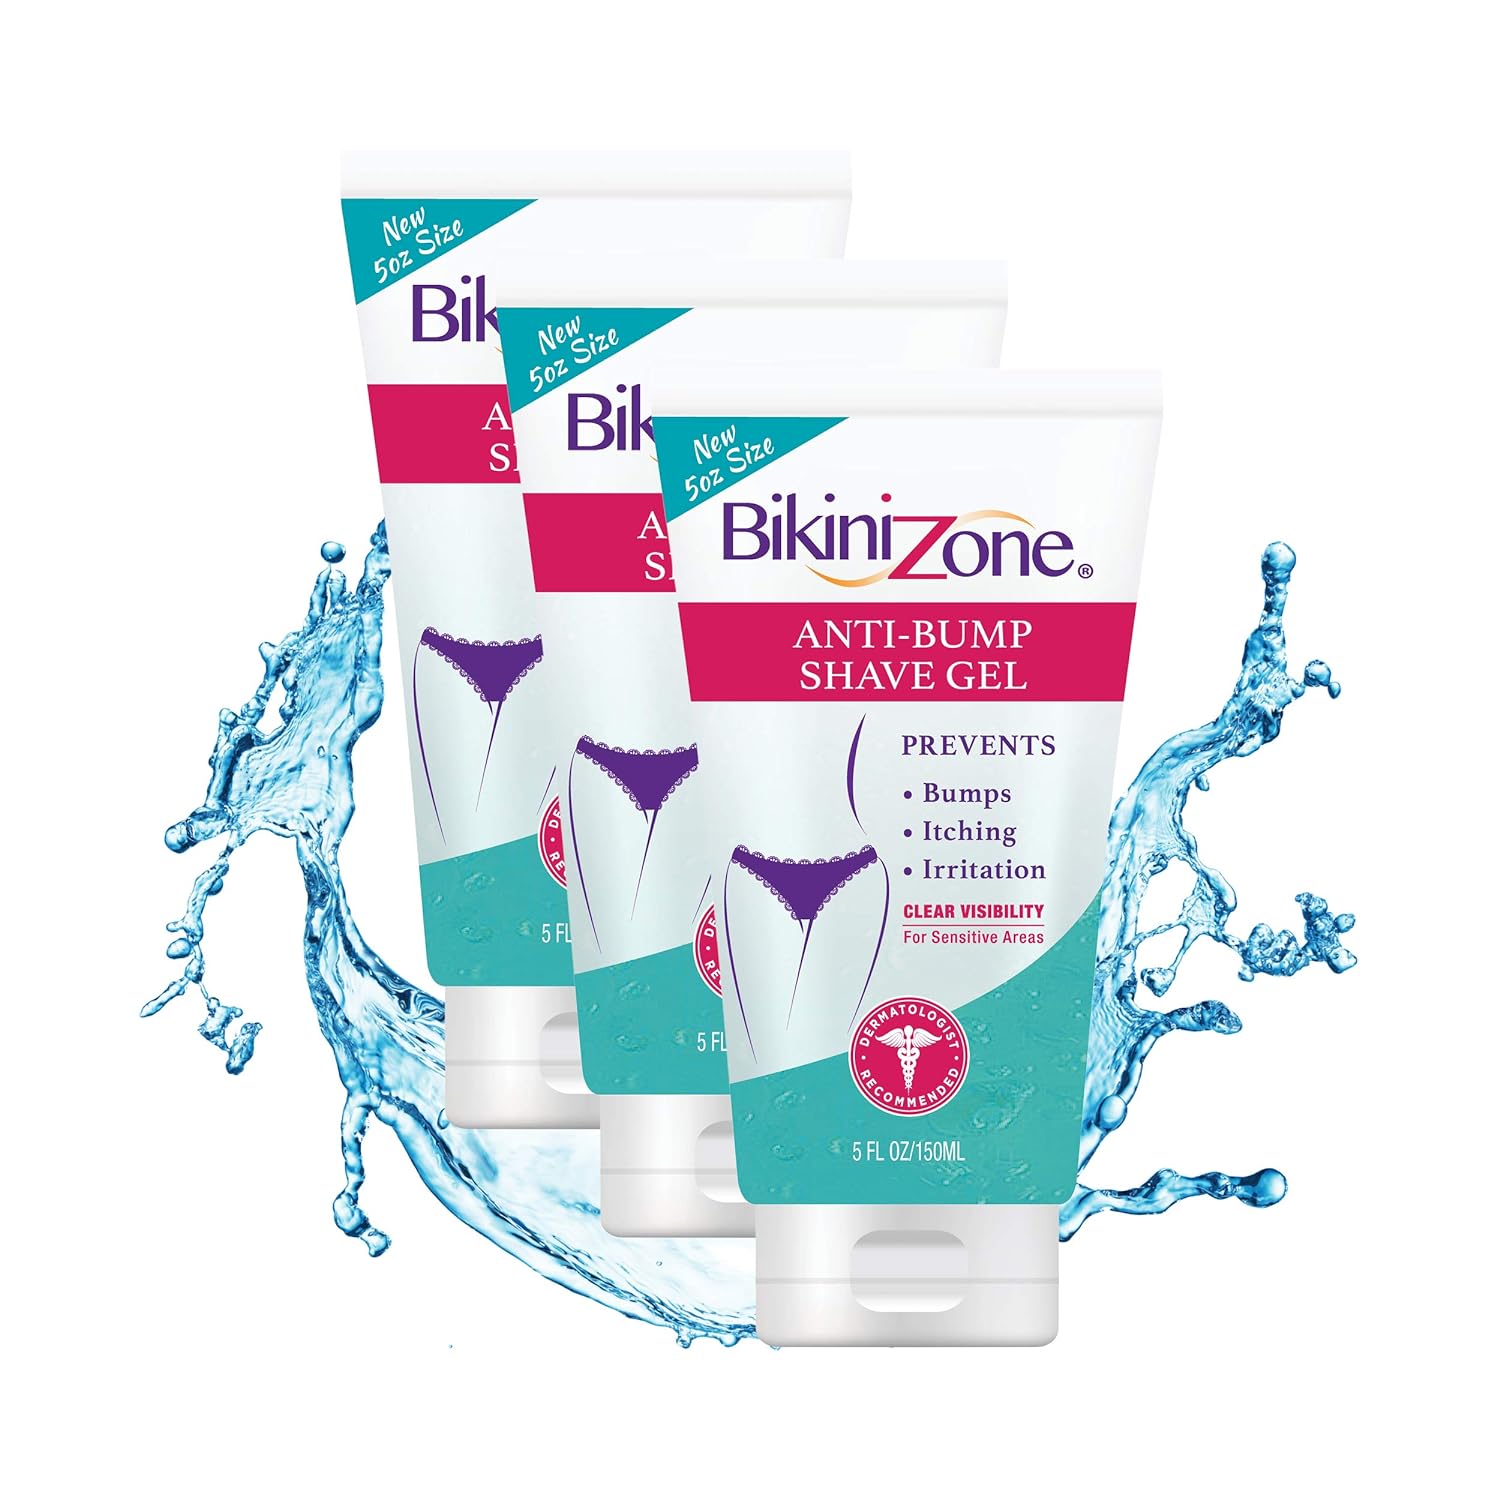 Bikini Zone Anti-Bumps Shave Gel - Close Shave w/No Bumps, Irritation, or Ingrown Hairs - Dermatologist Recommended - Clear Full Body Shaving Cream? (5 OZ, Pack of 3)